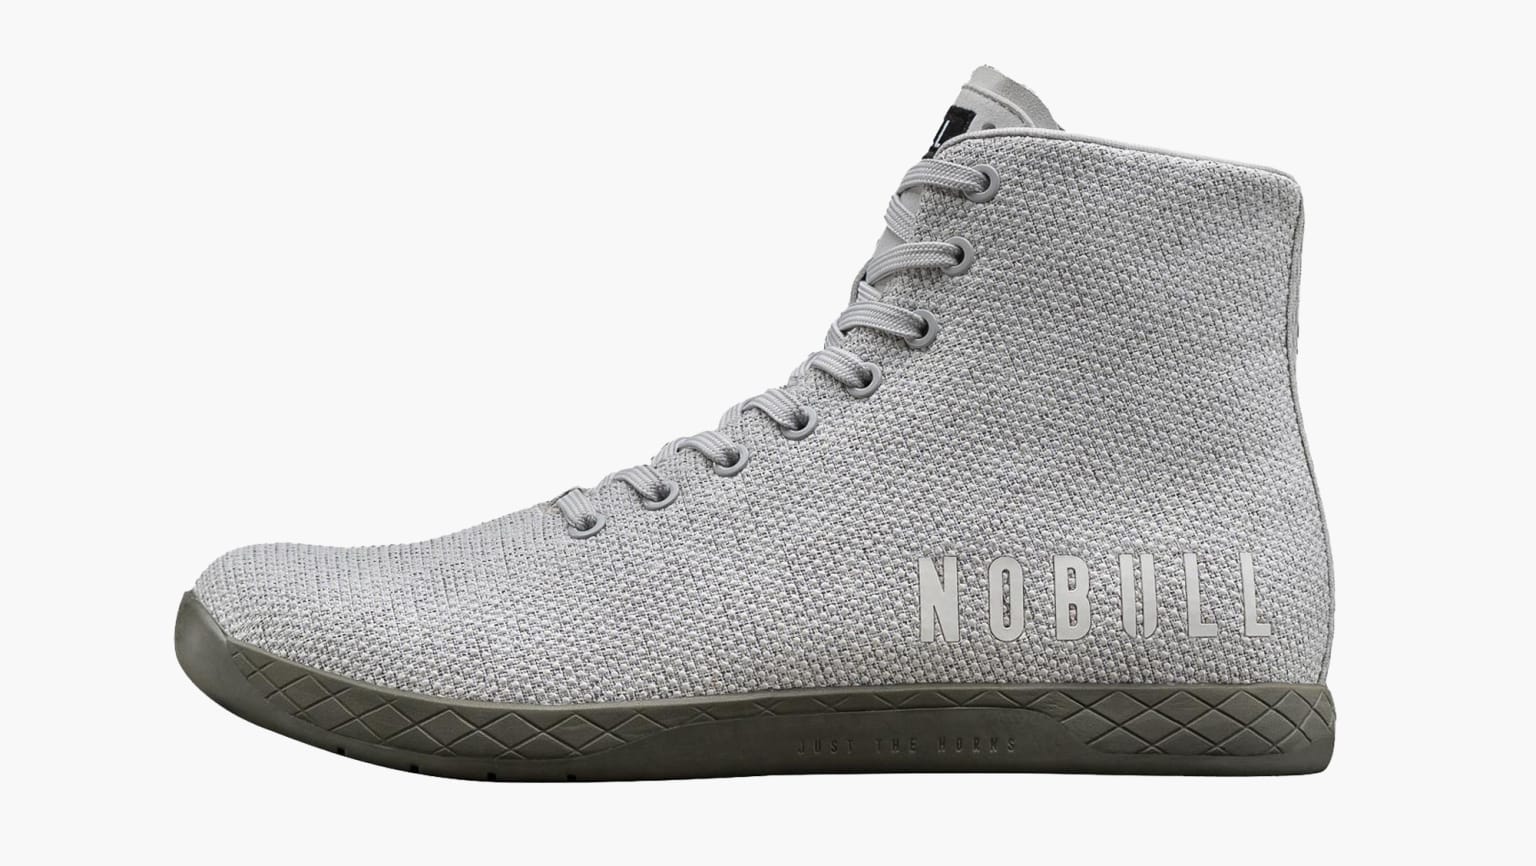 NOBULL High-Top Trainer - White Heather | Rogue Fitness Europe